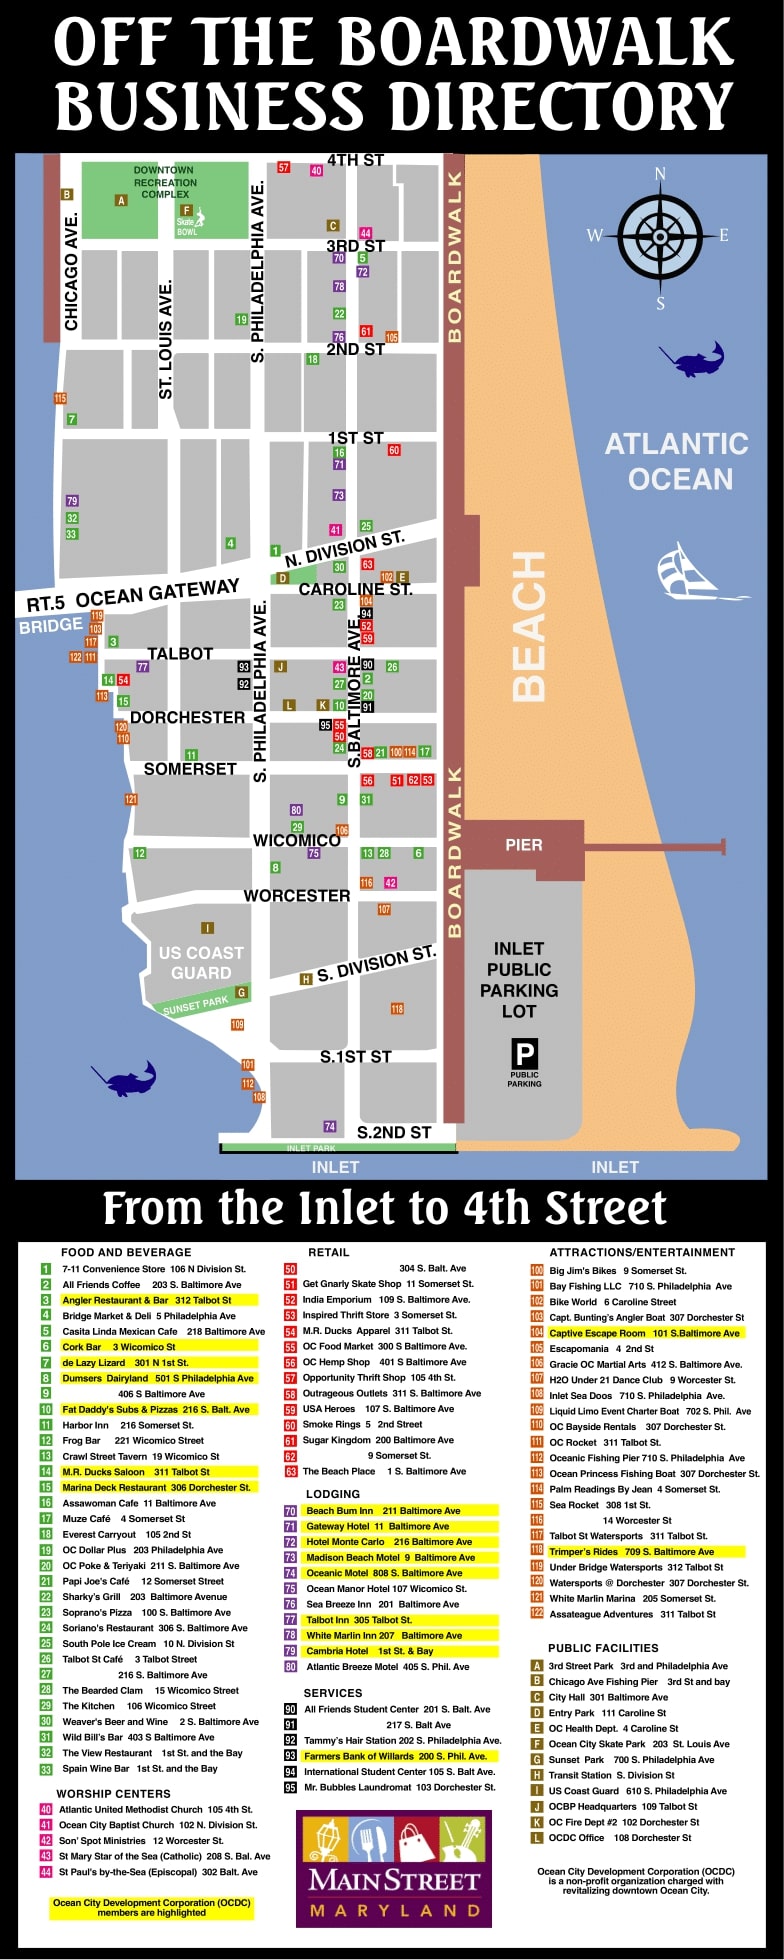 2019 Off the Boardwalk Business Directory between the Inlet and 4th Street